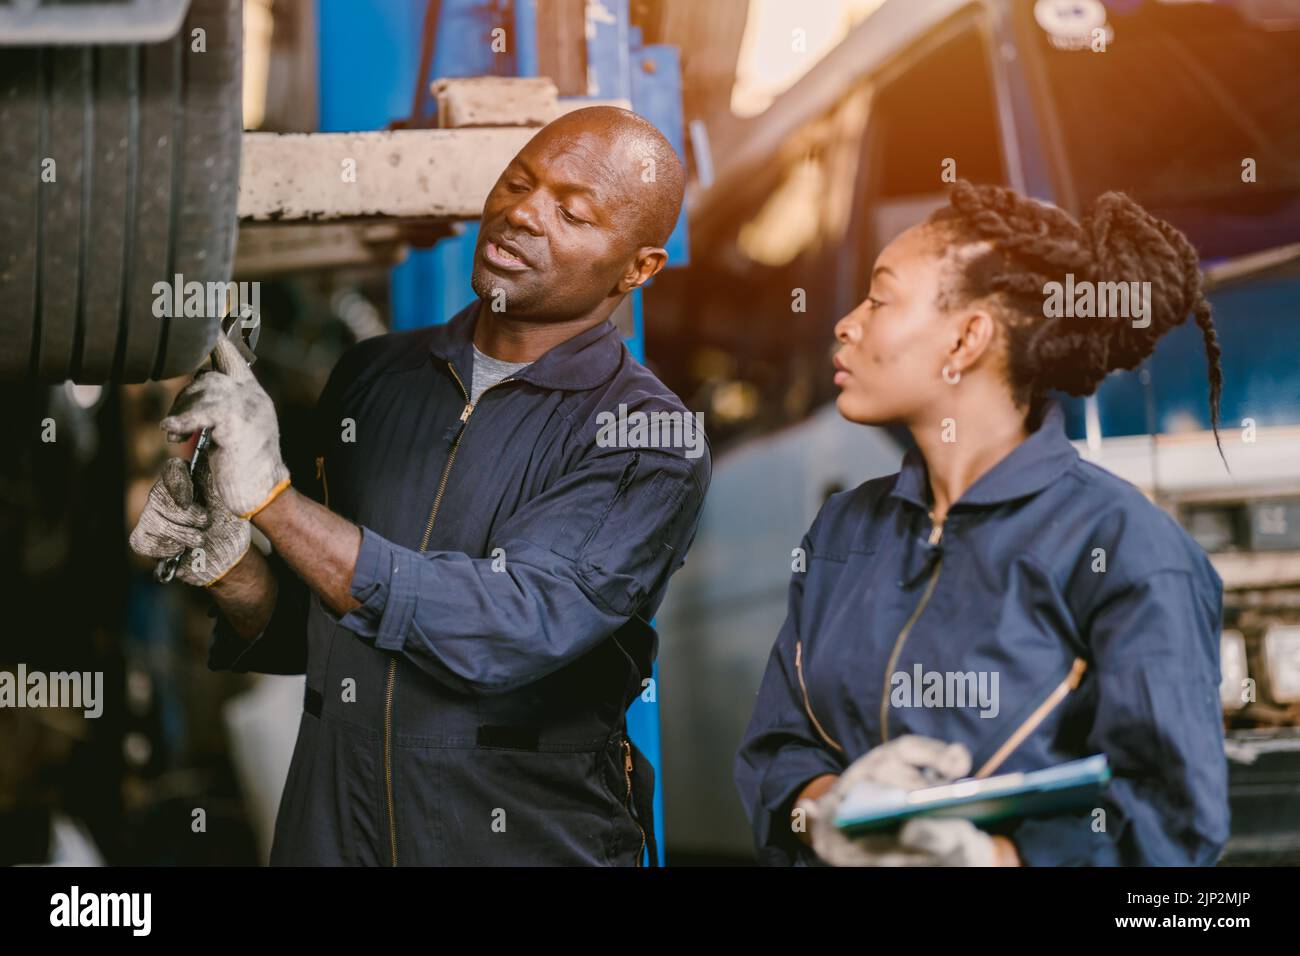 Auto garage worker Black African working together to fix service car vahicle wheel support together Stock Photo